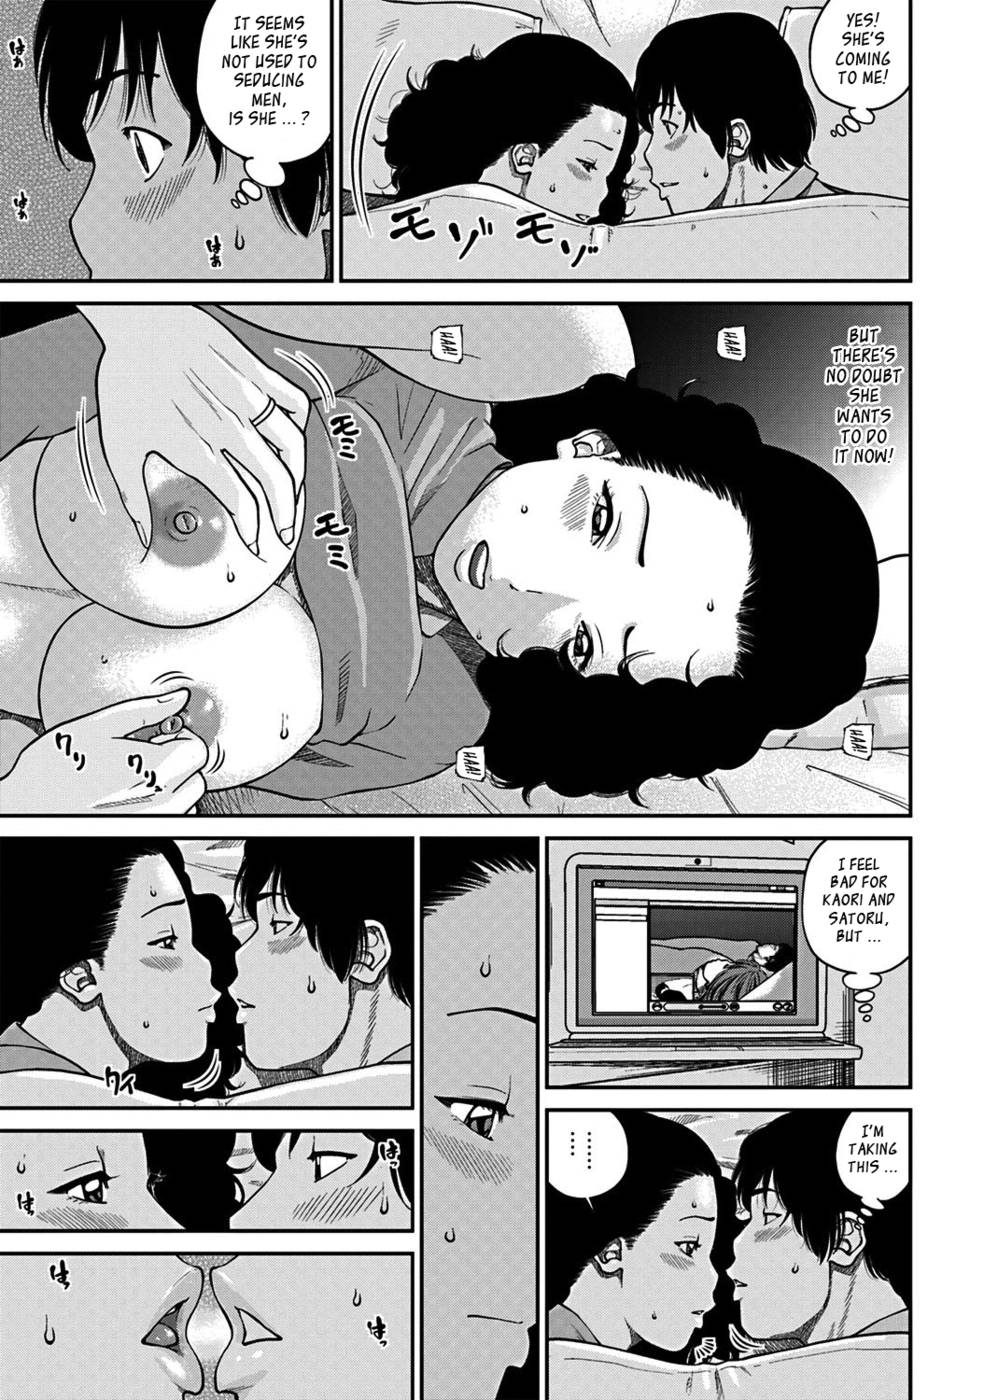 33 Year Old Unsatisfied Wife-Chapter 2-Spouse Swapping-First Night-Hentai Manga Hentai Comic pic picture